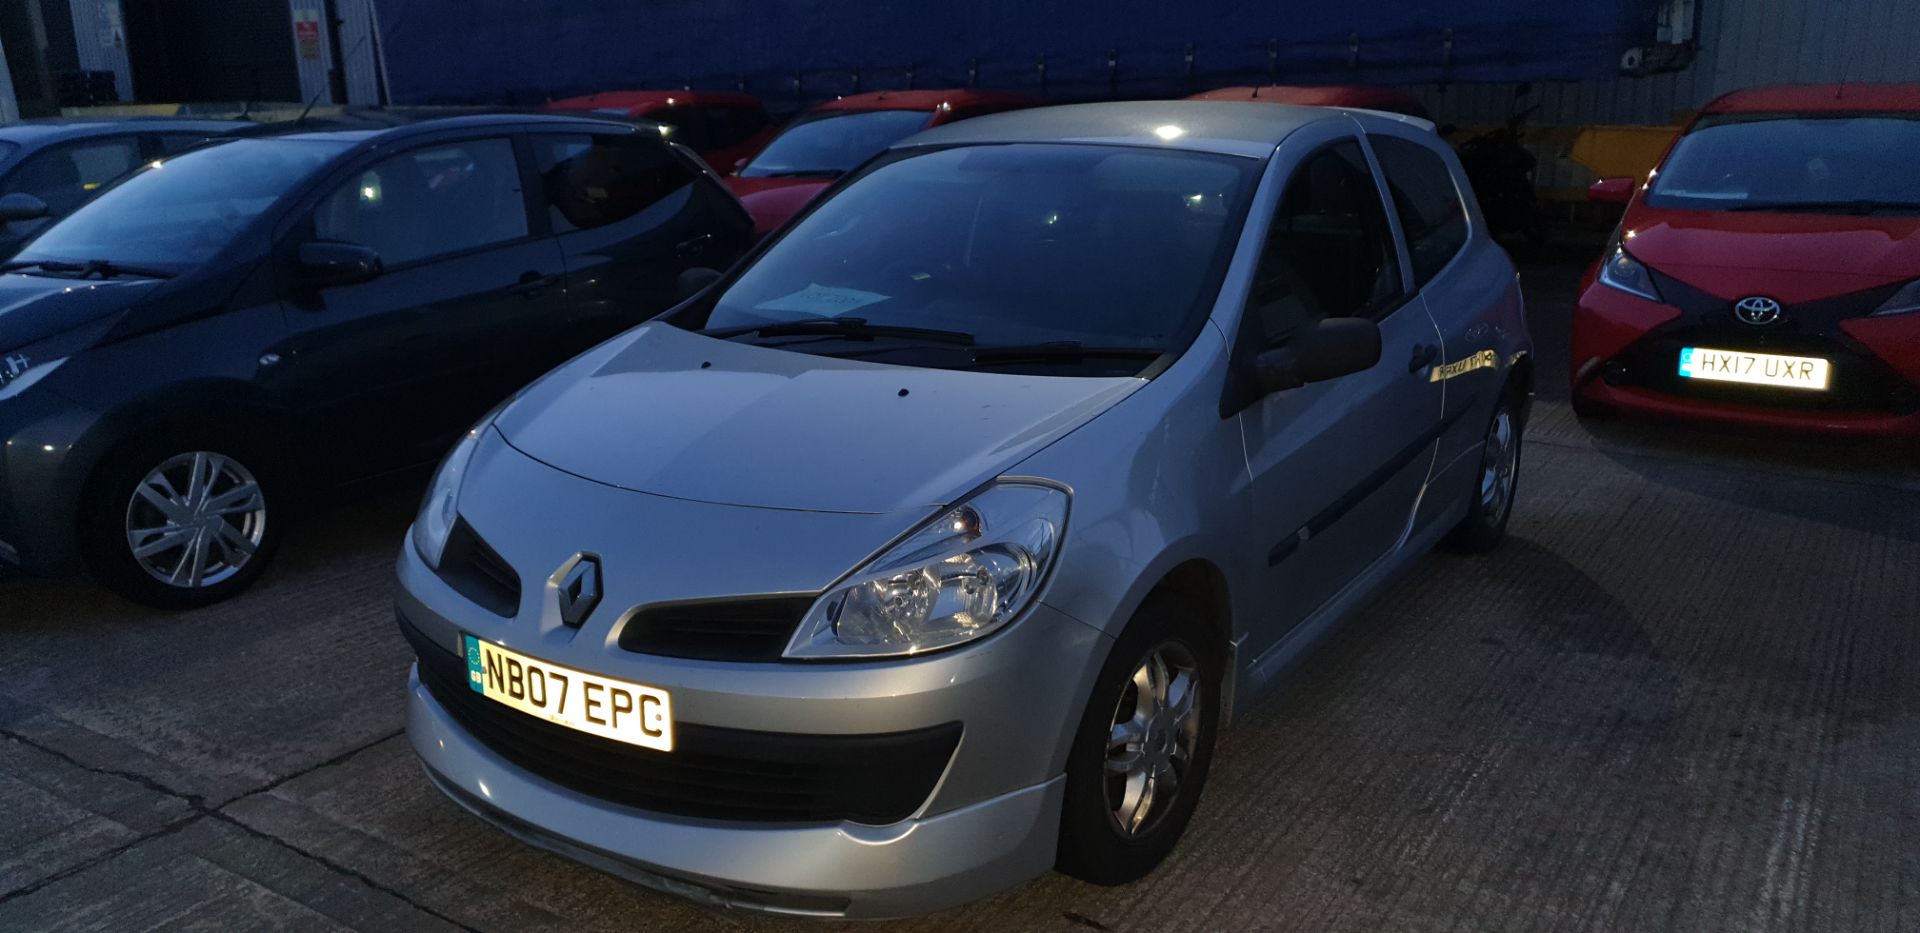 SILVER RENAULT CLIO EXTREME. Reg : NB07EPC, Mileage : 94,015 Details: KEY YES LOG BOOK YES MOT UNTIL - Image 3 of 3